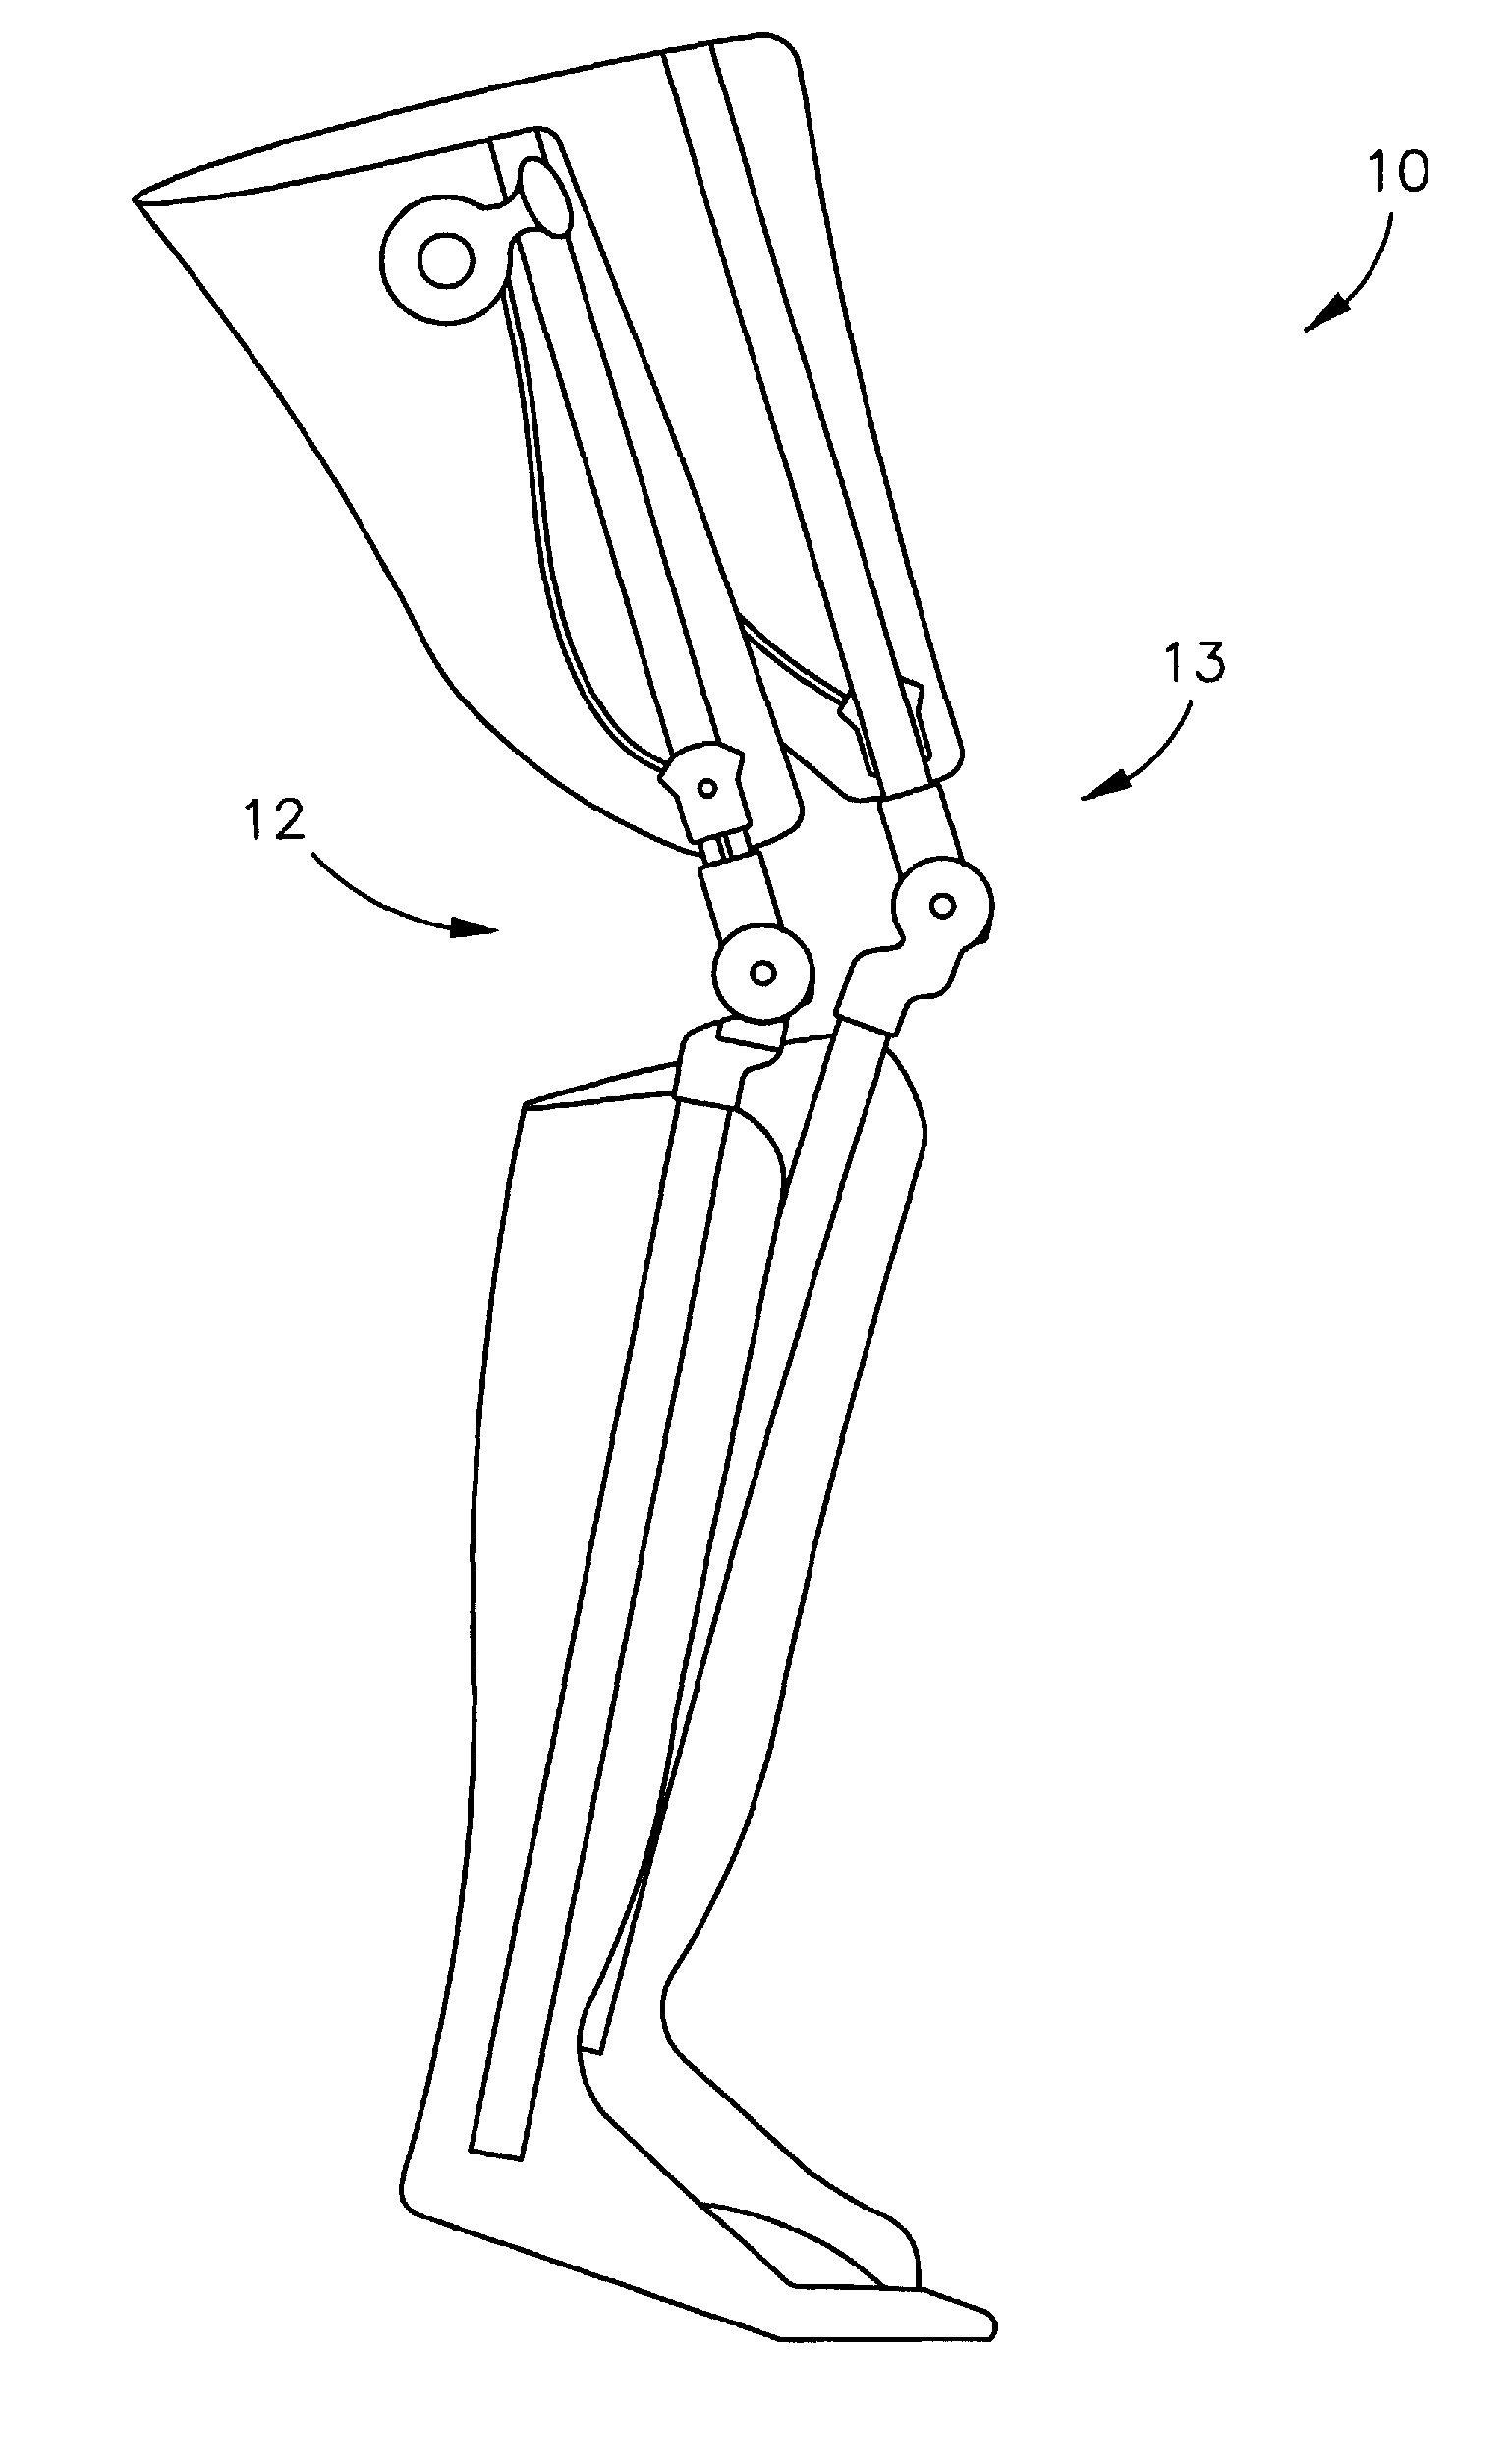 Ambulating ankle and knee joints with bidirectional dampening and assistance using elastomeric restraint